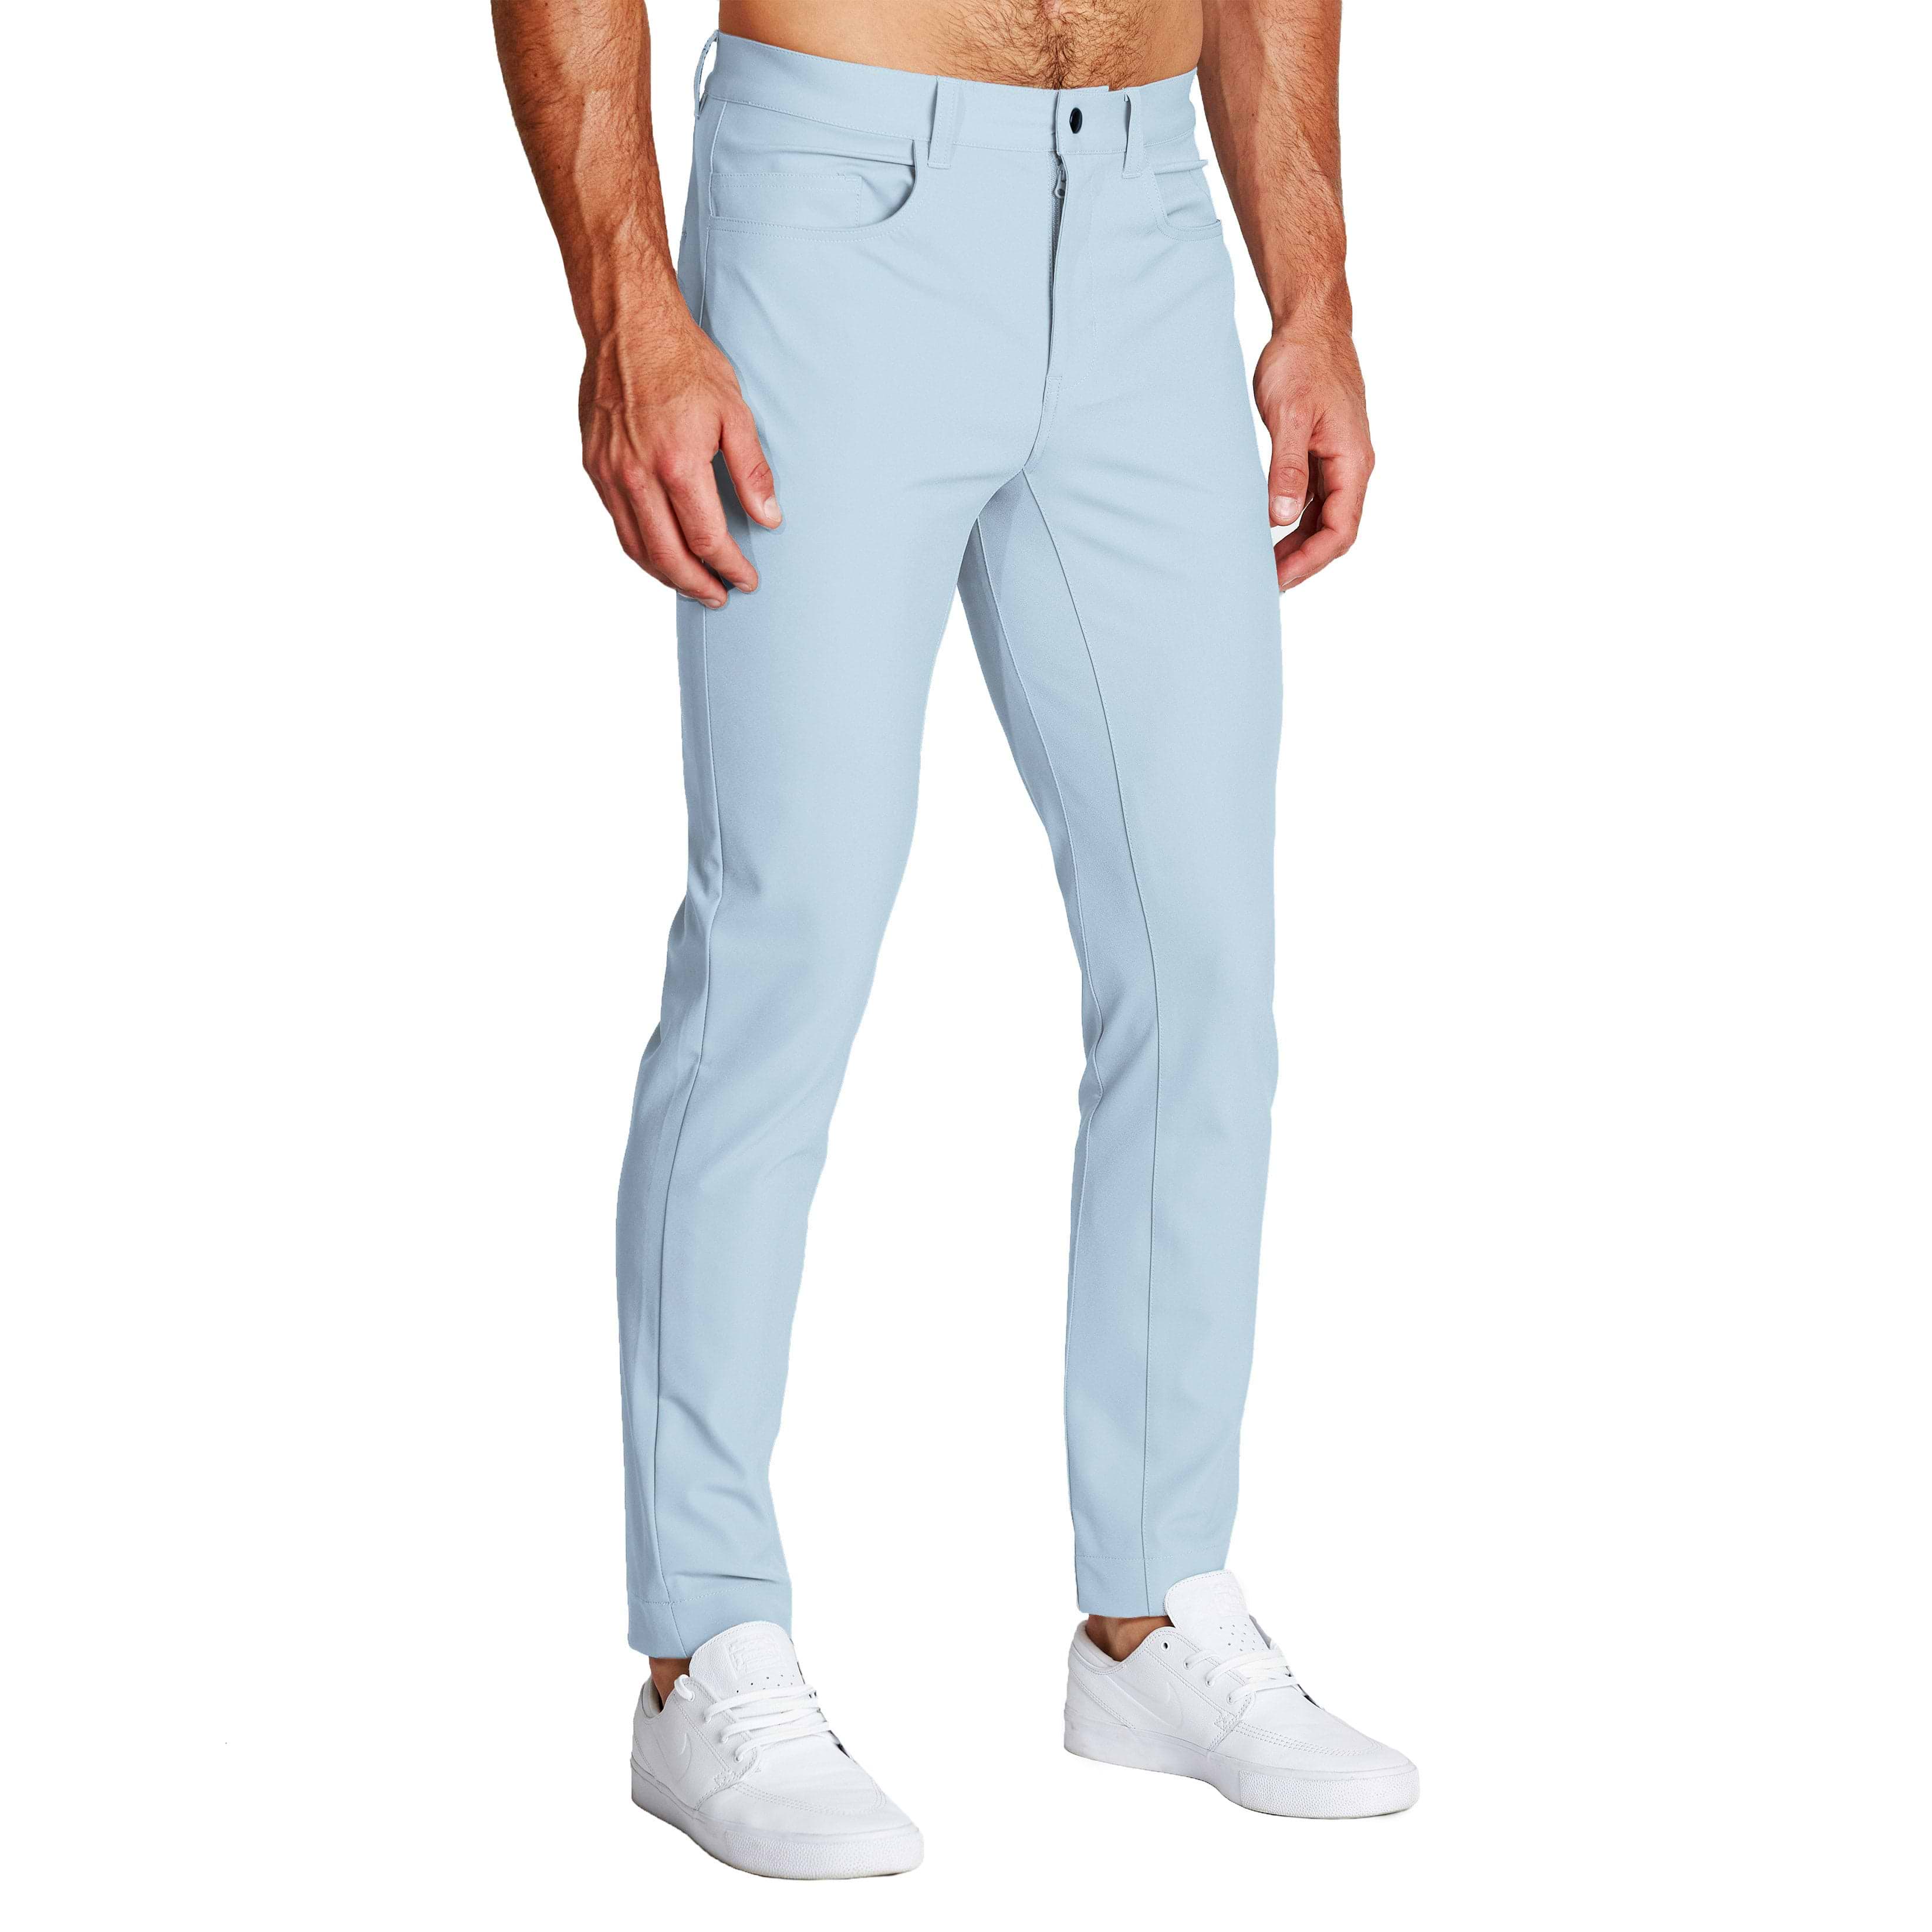 Athletic Fit Stretch Suit Pants - Heathered Light Blue